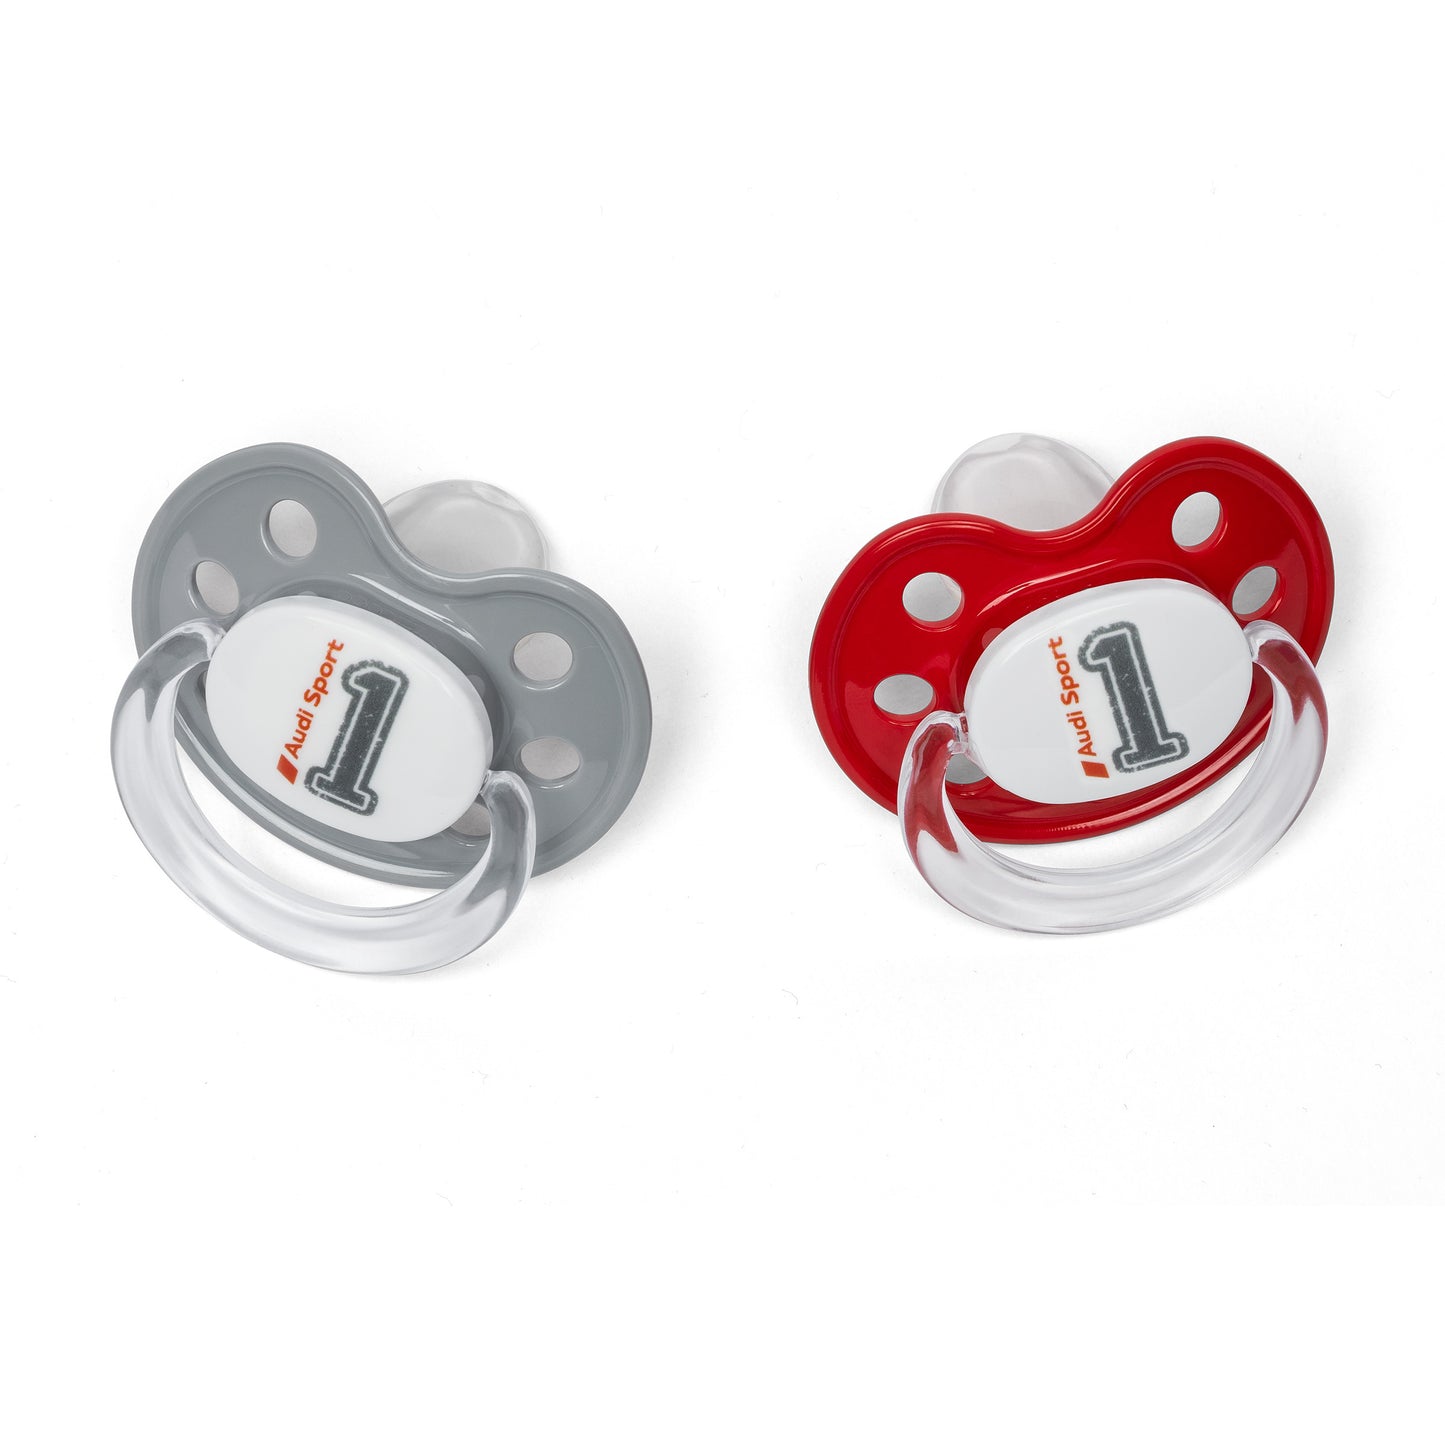 Audi Sport Dummy with chain, set of 2, Babys, grey/red